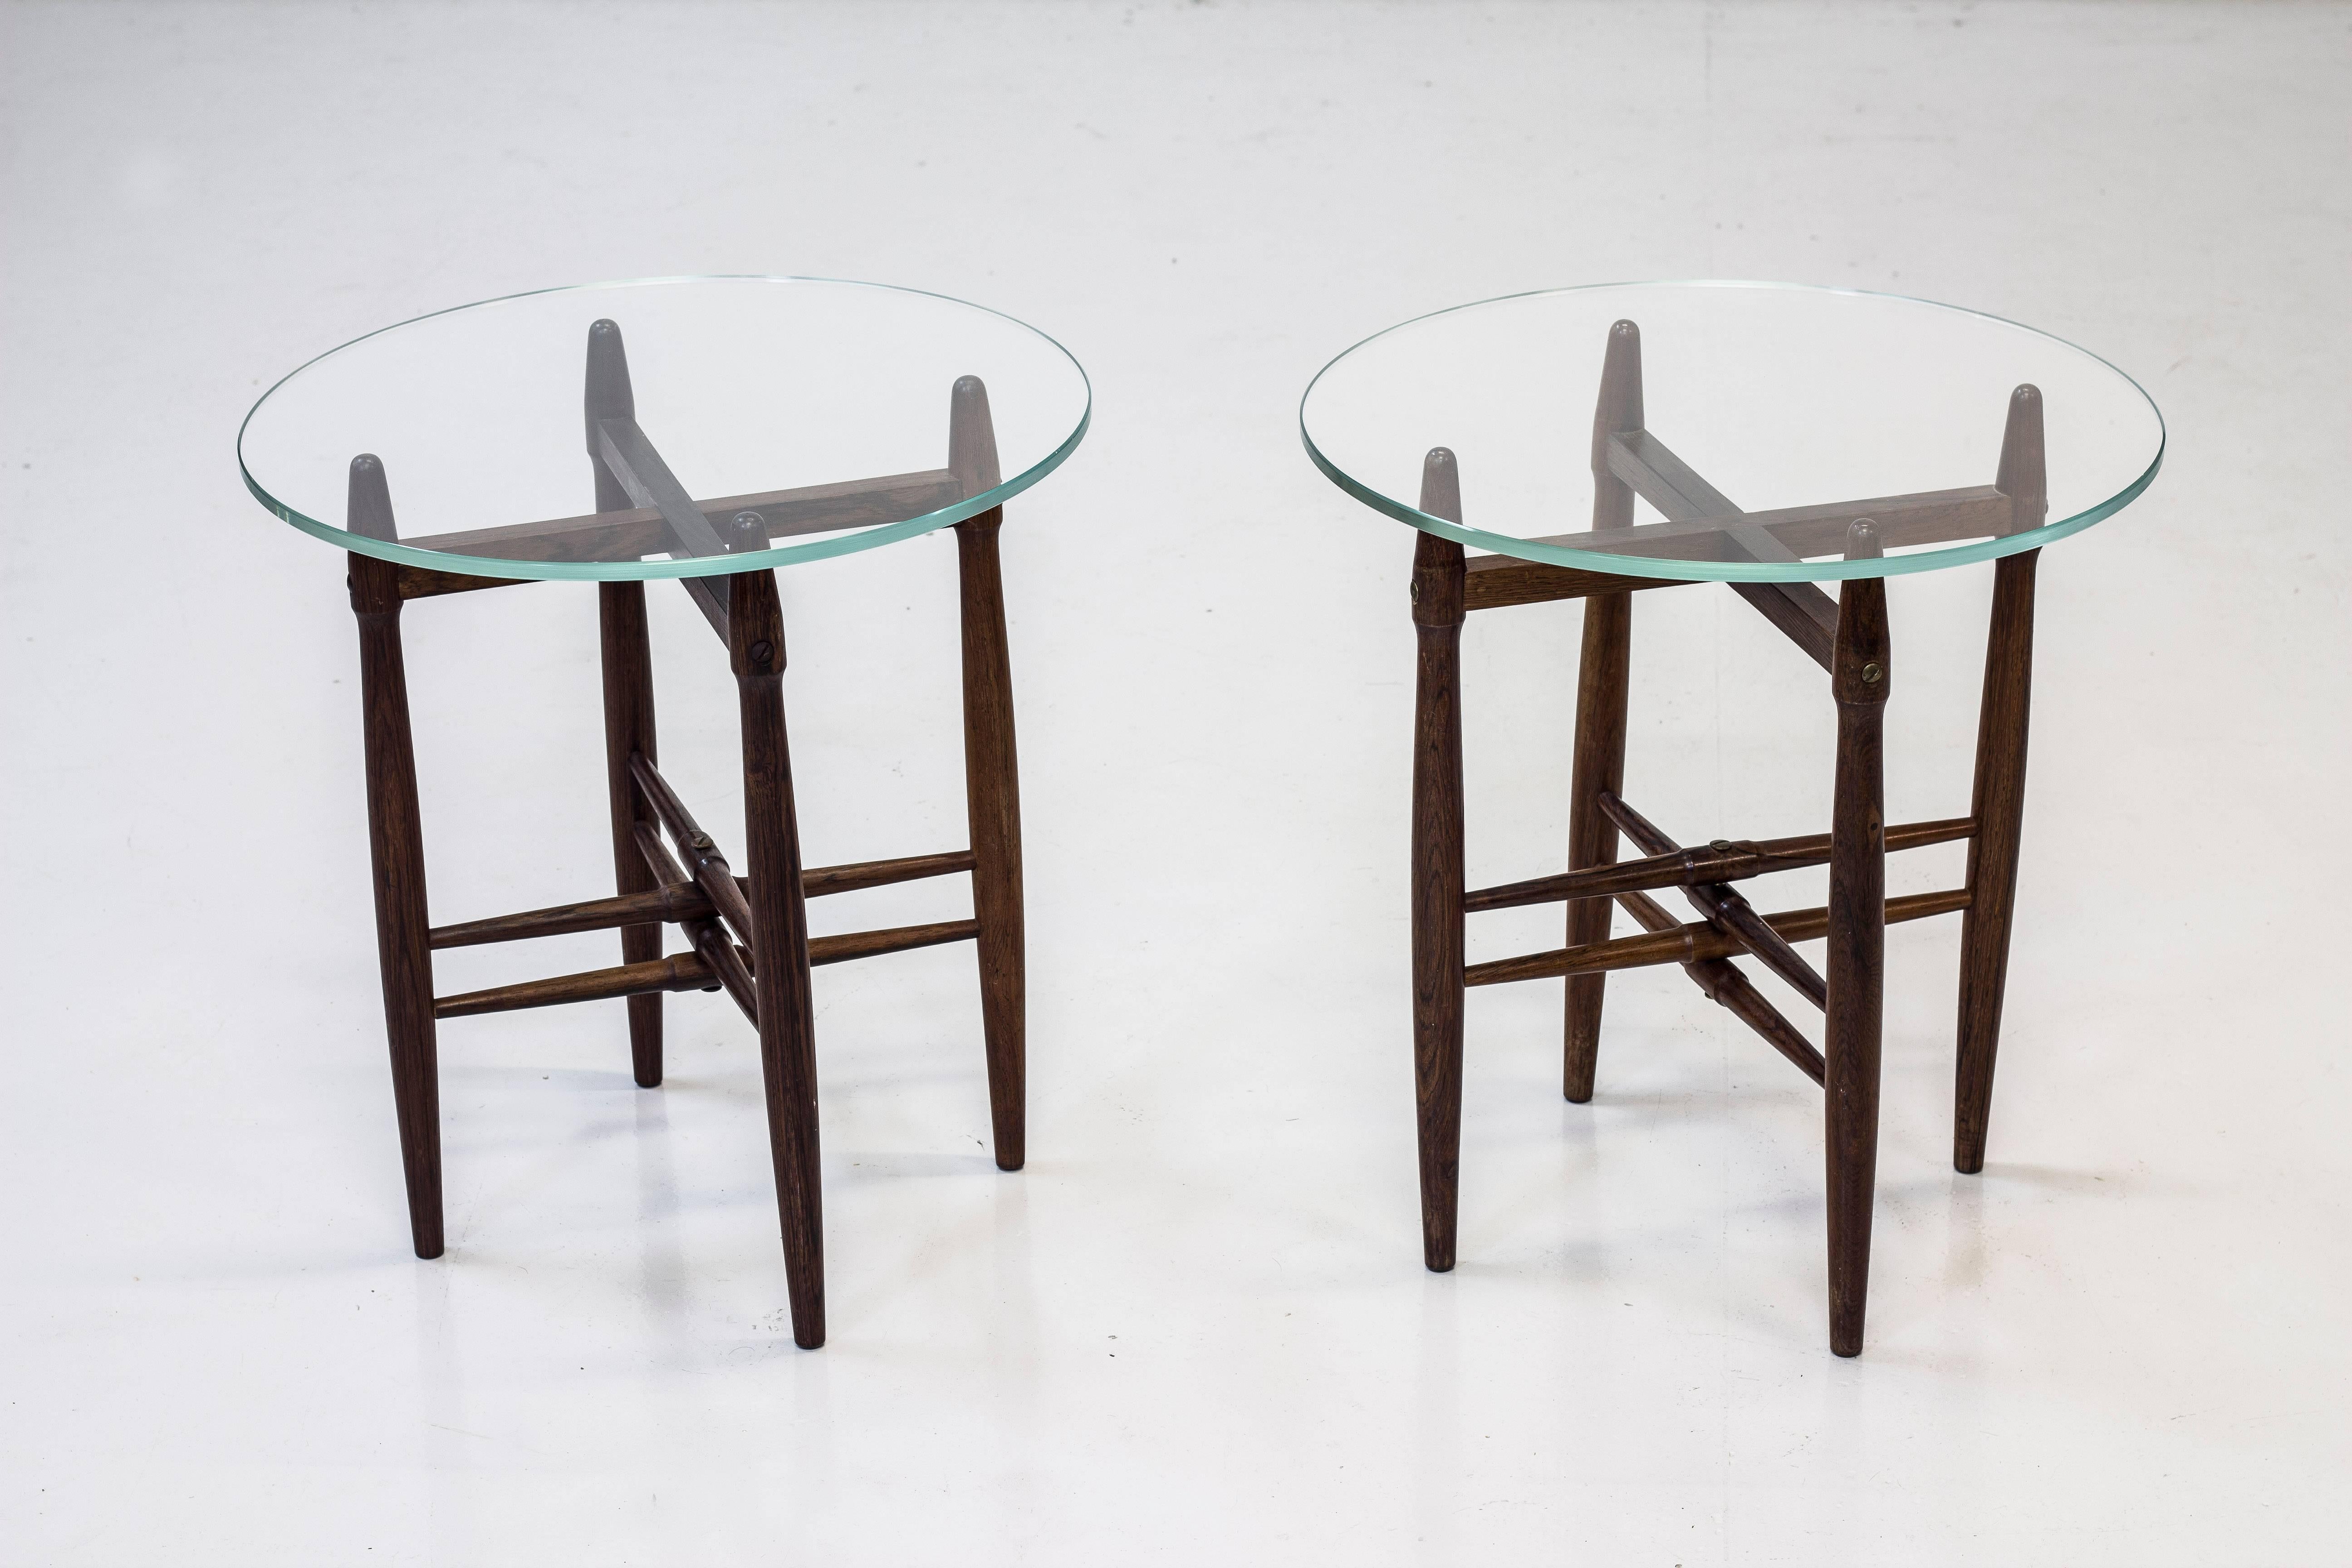 Pair of side tables designed by Poul Hundevad. Produced in Denmark during the 1950s by Vamdrup. Solid palisander table stands with thick round glass table tops. Excellent vintage condition with few signs of wear and very light age related